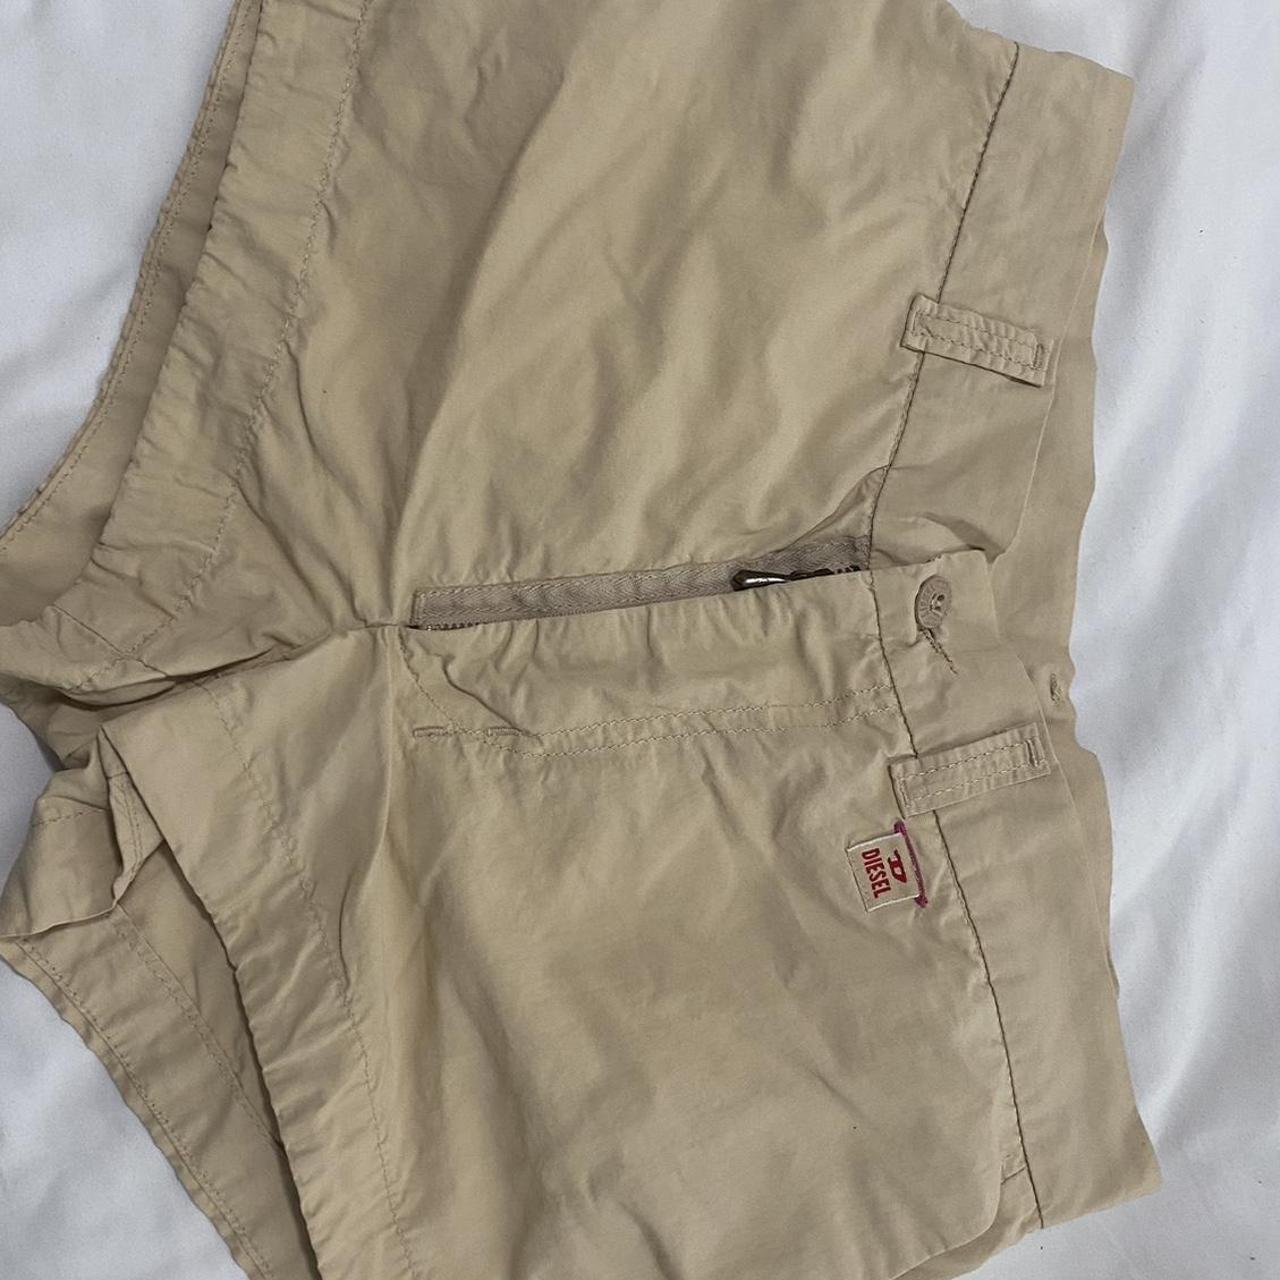 Diesel Red Tag Women's Tan and Cream Shorts (2)